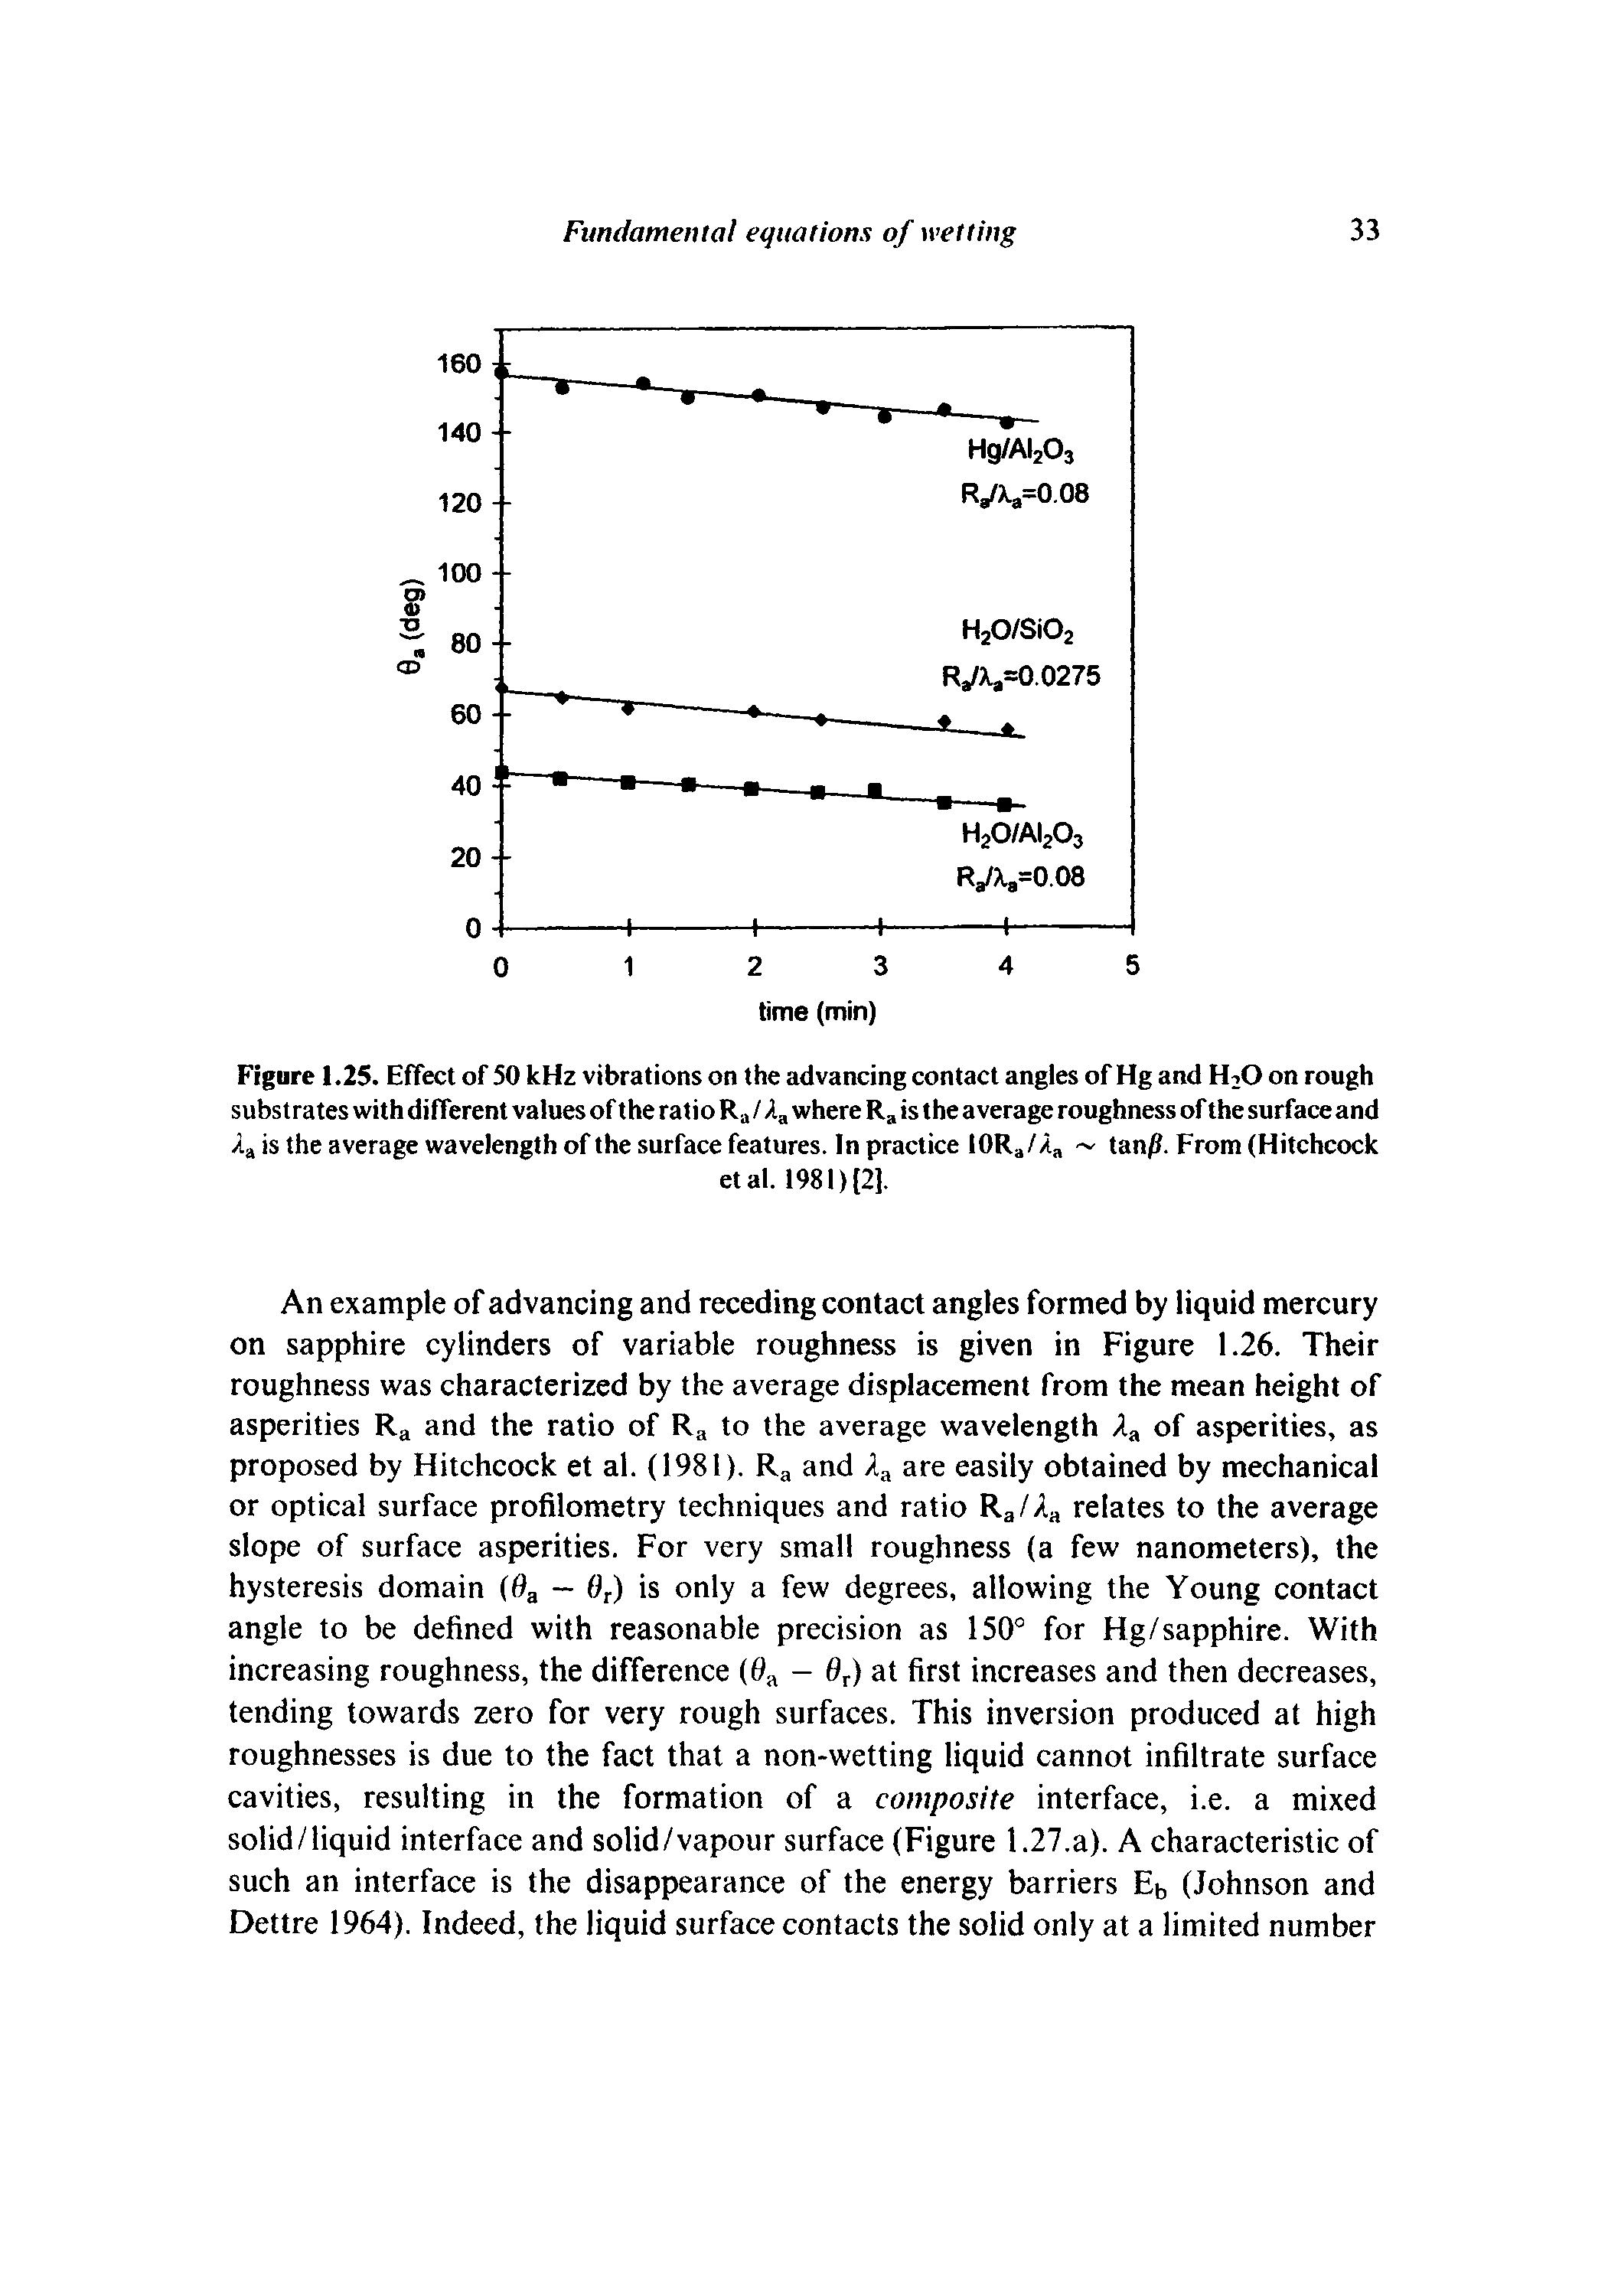 Figure 1.25. Effect of 50 kHz vibrations on the advancing contact angles of Hg and H20 on rough substrates with different values of the ratio Ra / Aa where Ra is the average roughness of the surface and Aa is the average wavelength of the surface features. In practice IORa/Aa tan/ . From (Hitchcock...